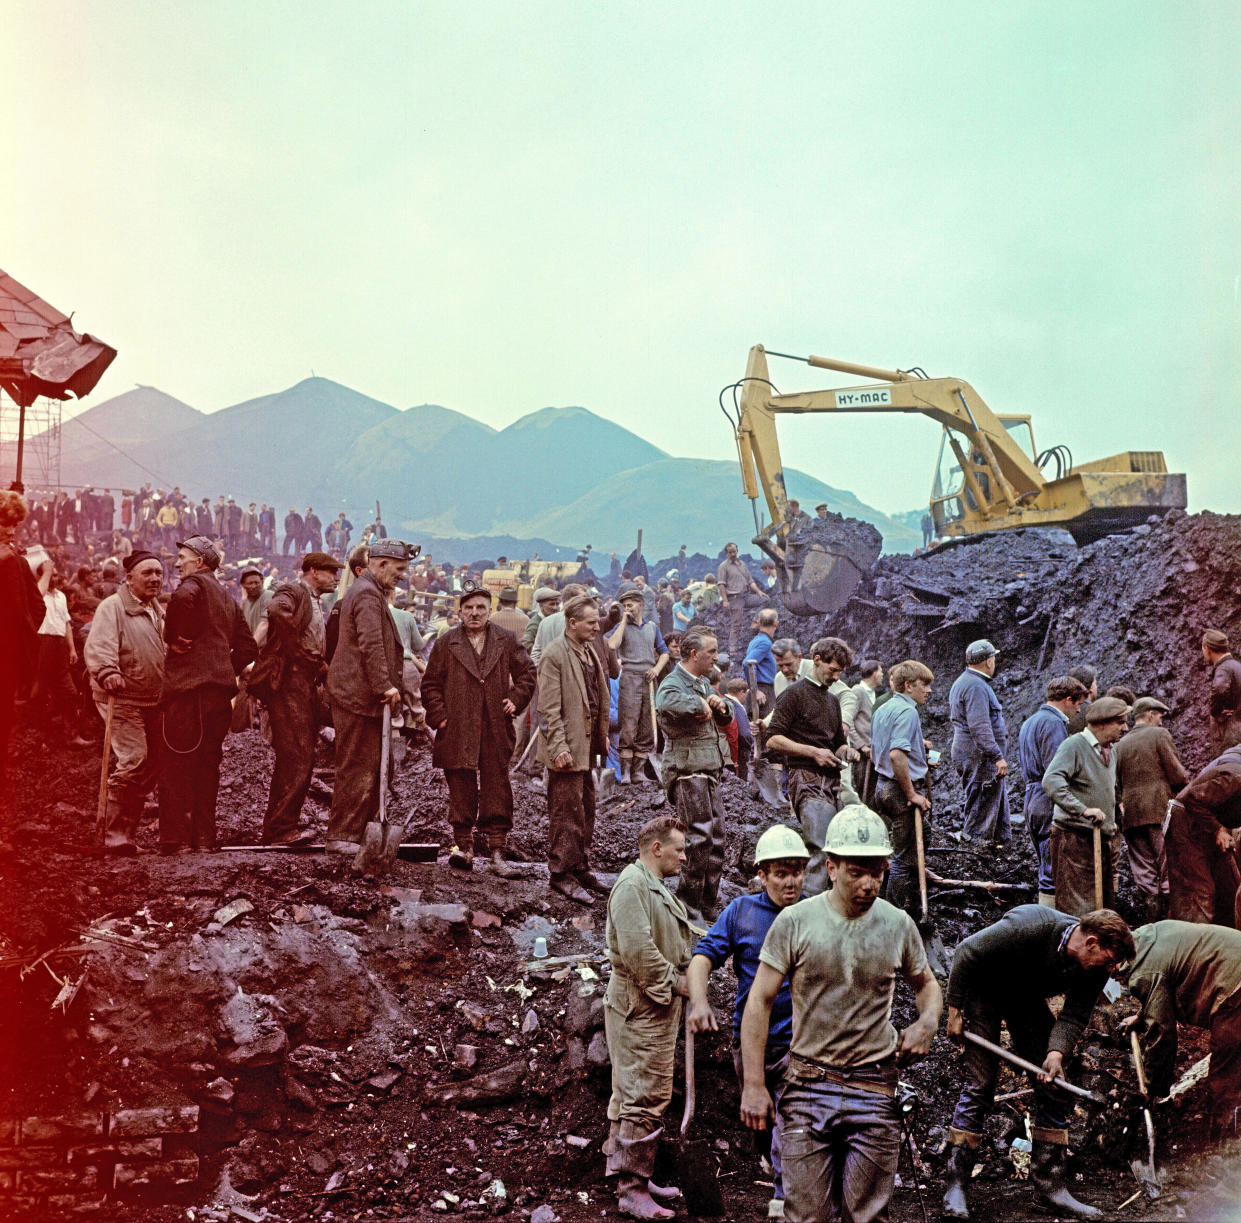 The Disaster scene at Aberfan, South Wales At 9.15 am on Friday 21 October 1966, after days of rain, a mining waste tip slid down a mountainside into the village of Aberfan, near Merthyr Tydfil in South Wales. It first destroyed a farm cottage in its path, killing all the occupants, before engulfing 20 houses and Pantglas Junior School where pupils had just returned to class after singing 'All Things Bright and Beautiful' at assembly. The toll was 144 dead, 116 of them children A small section of the school roof can be seen on the left of the picture Picture taken by Carl Bruin Picture taken circa 21st October 1966. (Photo by Carl Bruin/Mirrorpix/Getty Images)